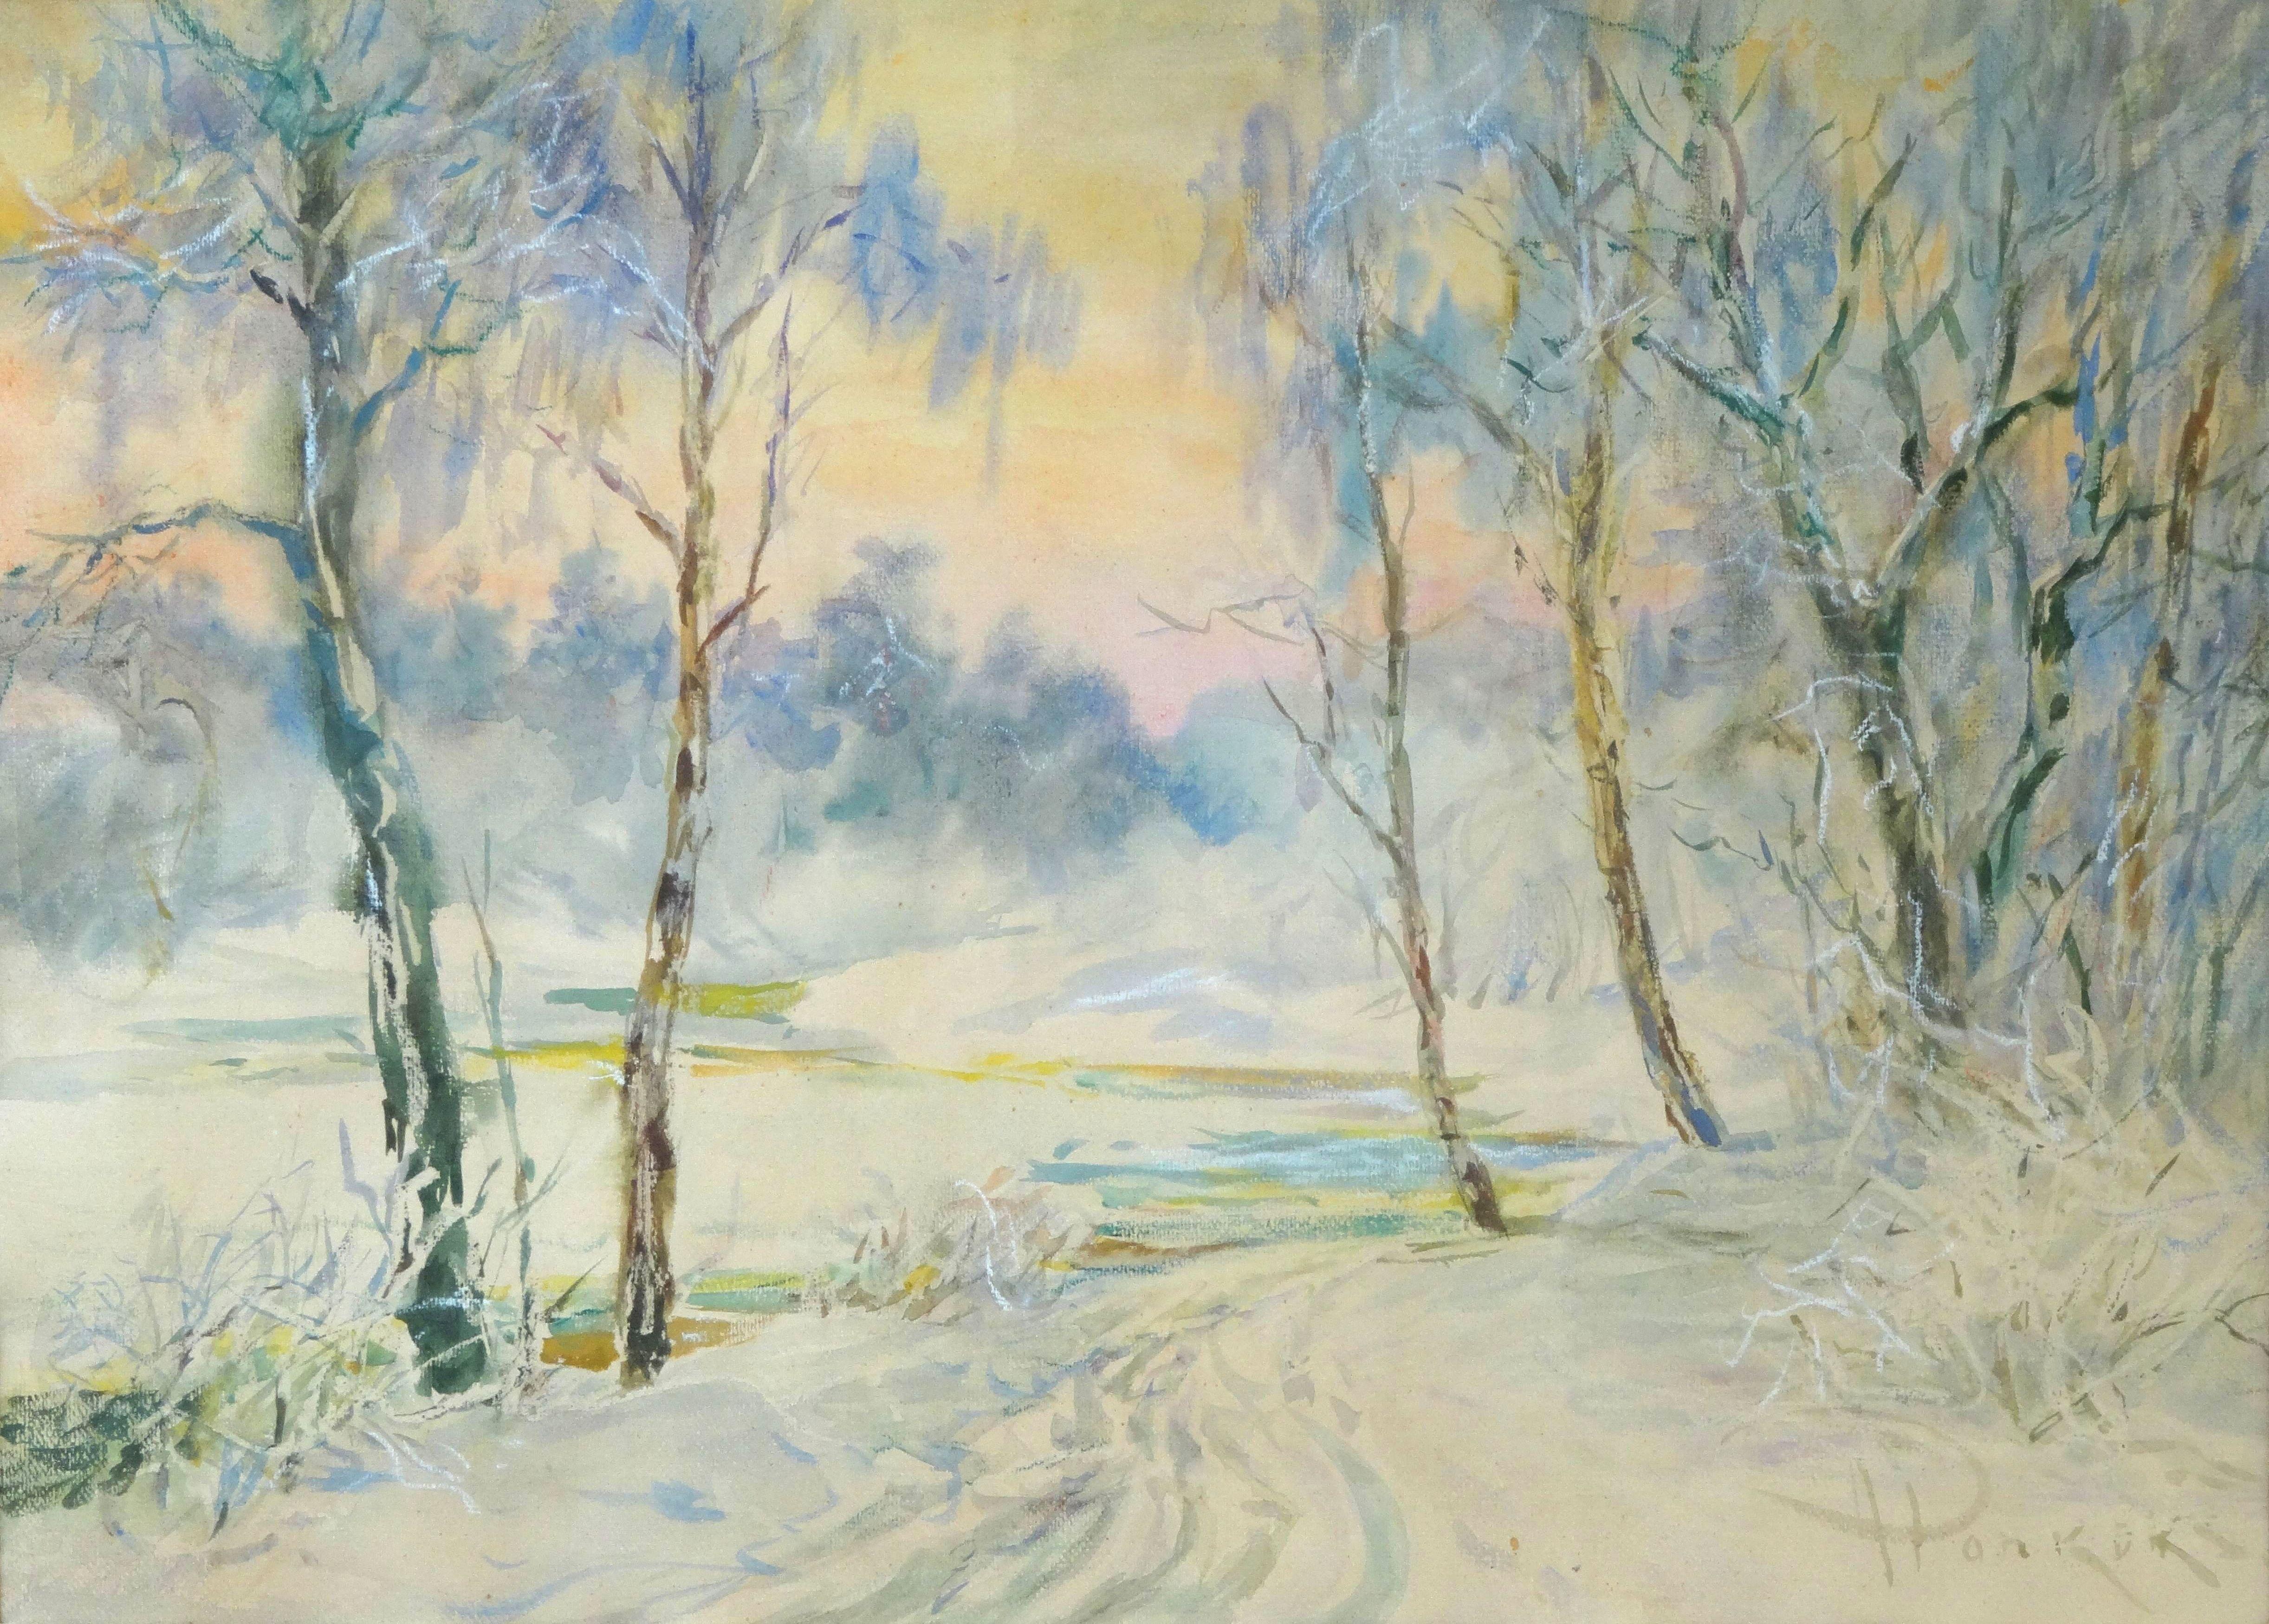 Arnolds Pankoks Landscape Painting - The path along the river in winter. Paper, watercolor, 40x55, 5 cm